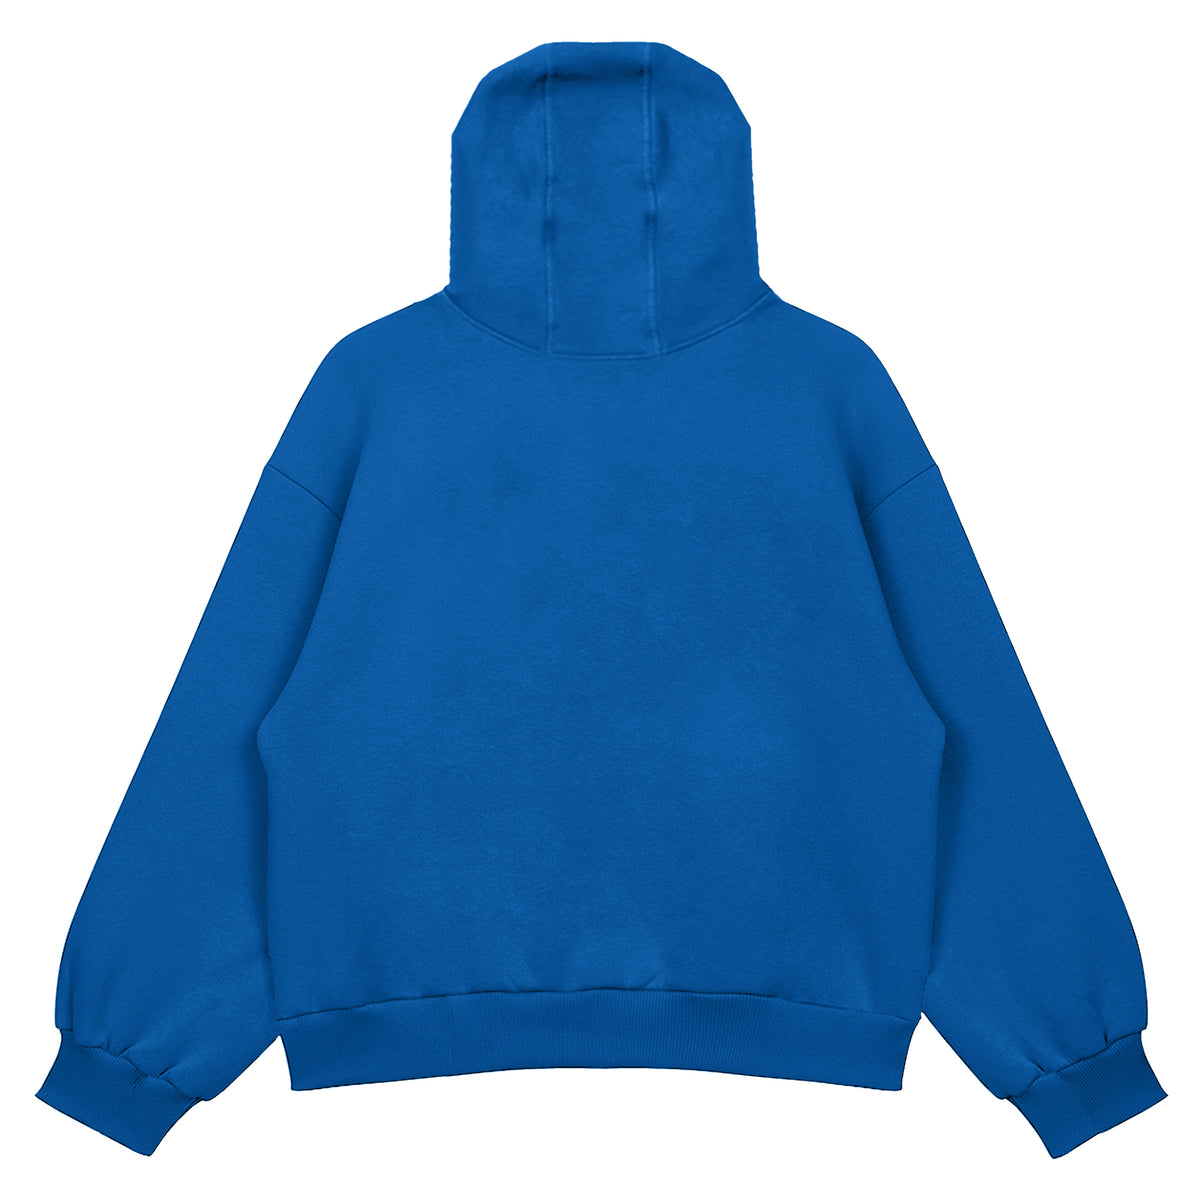 Dystopia Blue Fabric Hoodie